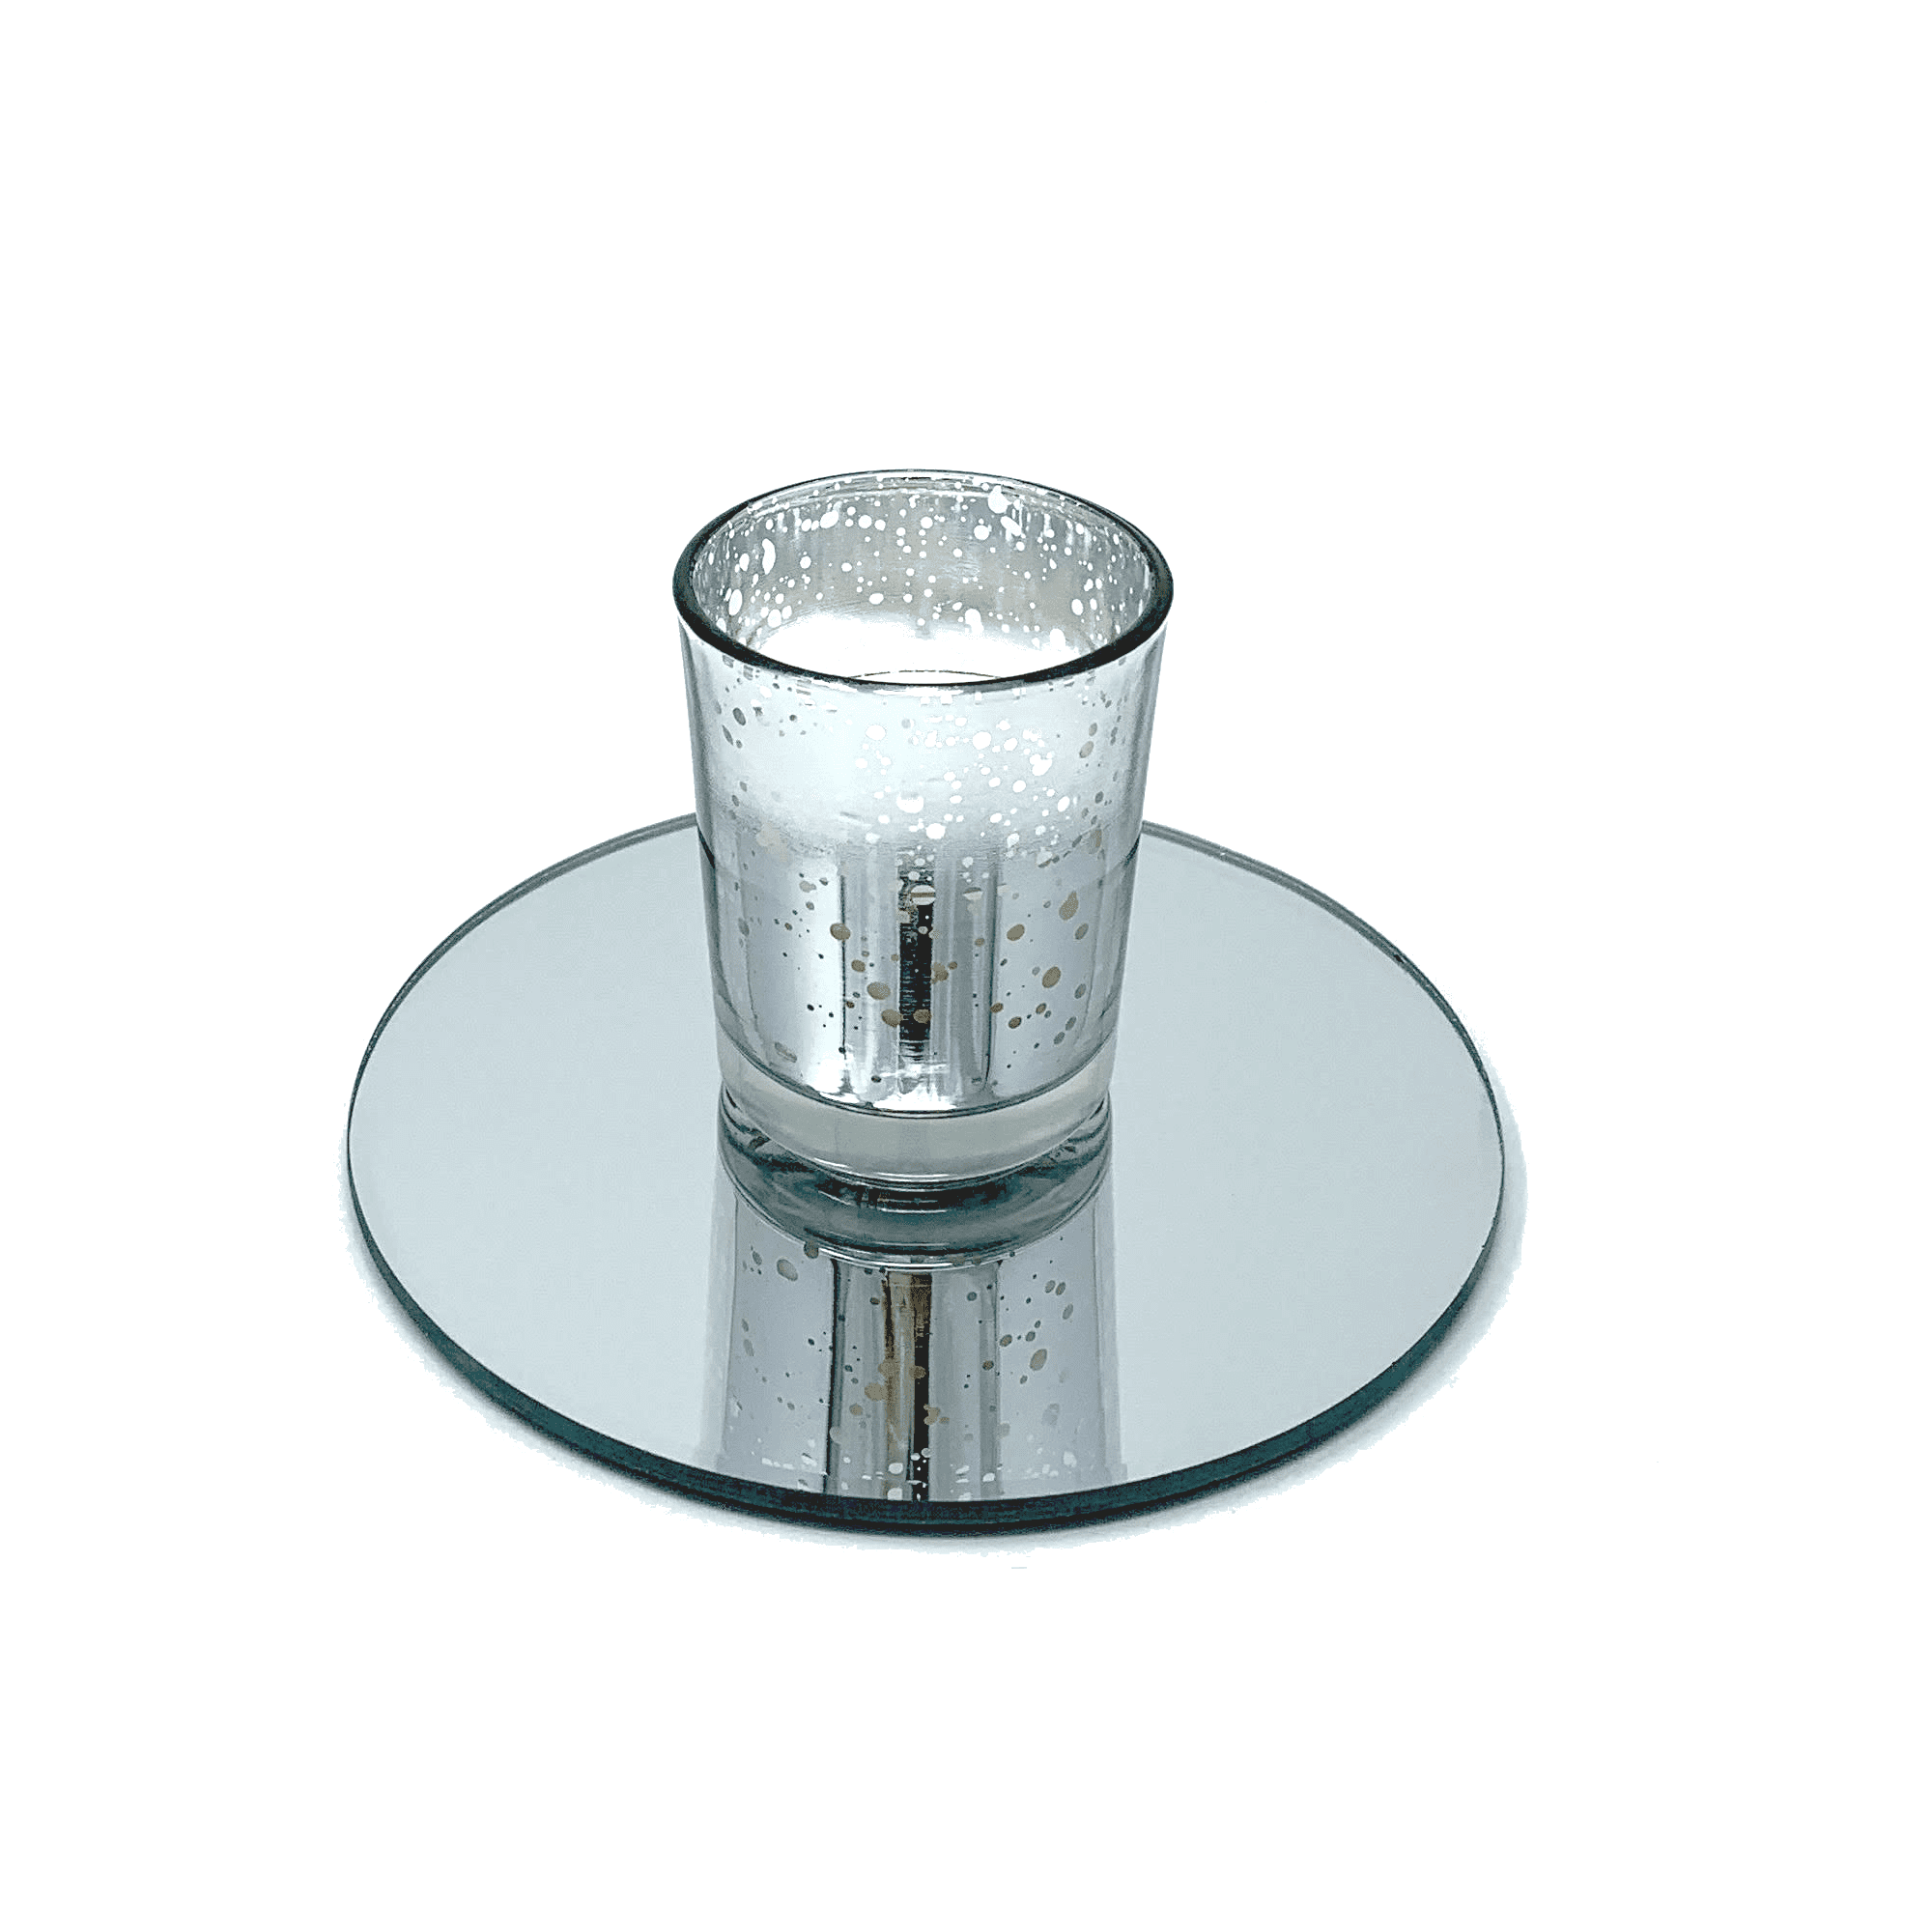 Prodbuy-Limited Vintage Round Mirrored Glass Candle Plate with Silver Iron Surround Small 